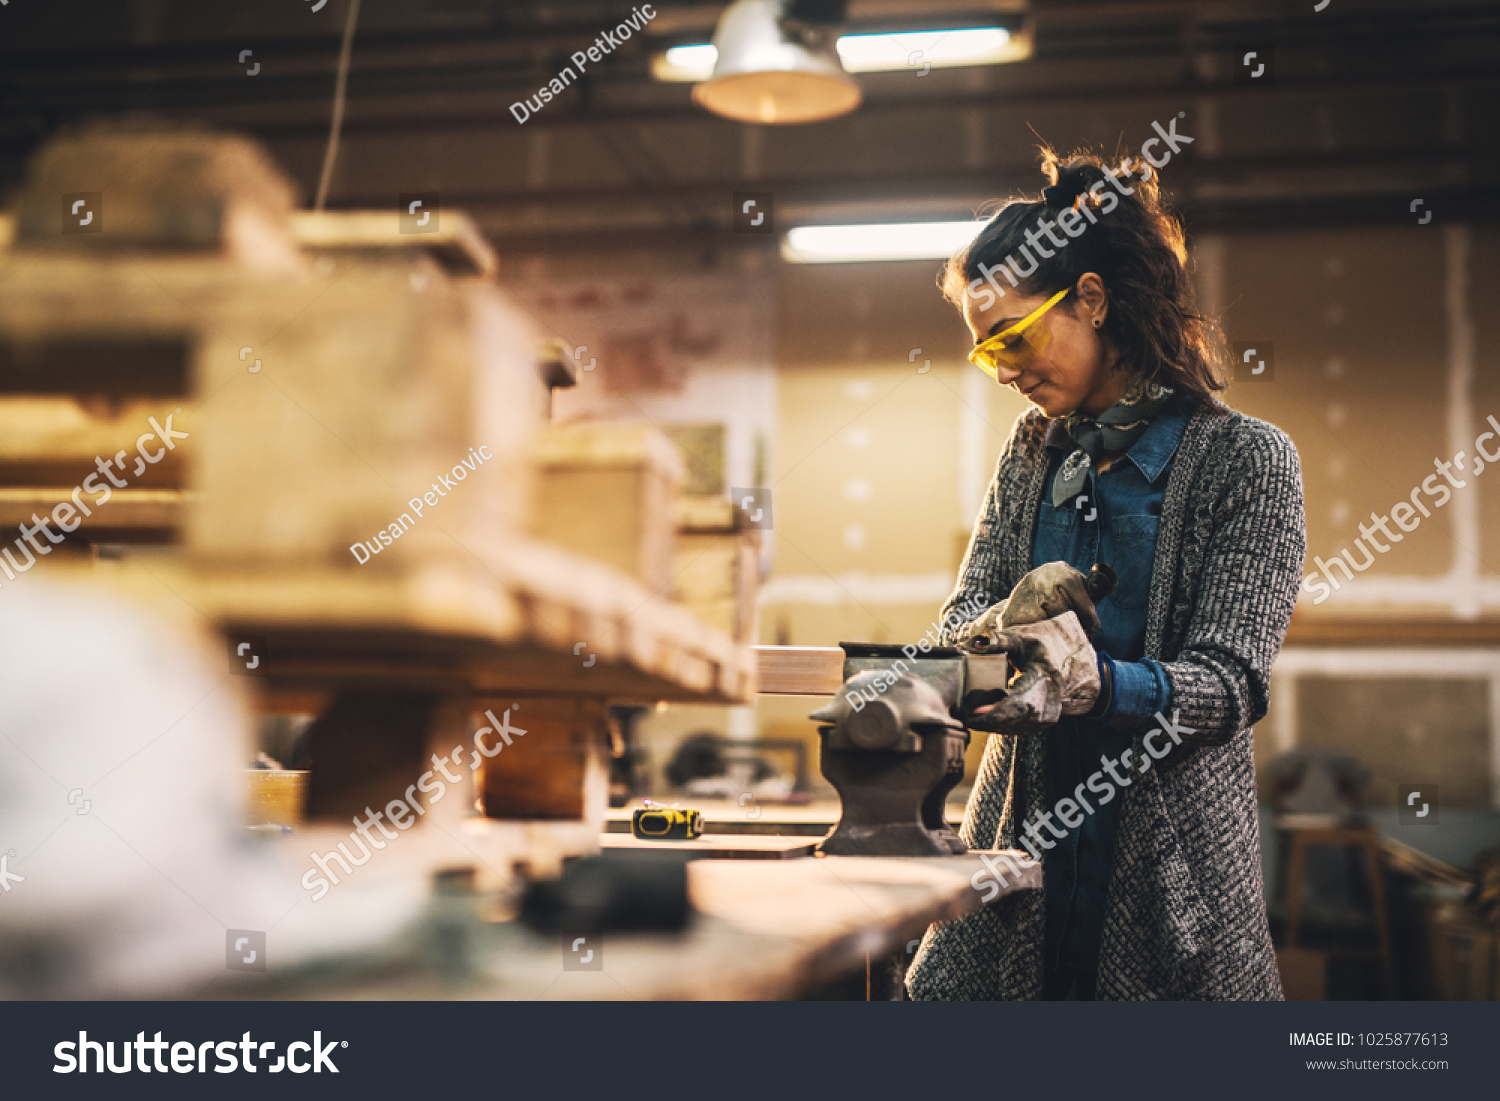 Portrait view of satisfied smiling middle aged professional female carpentry worker with steel vise on the table in the workshop. #1025877613